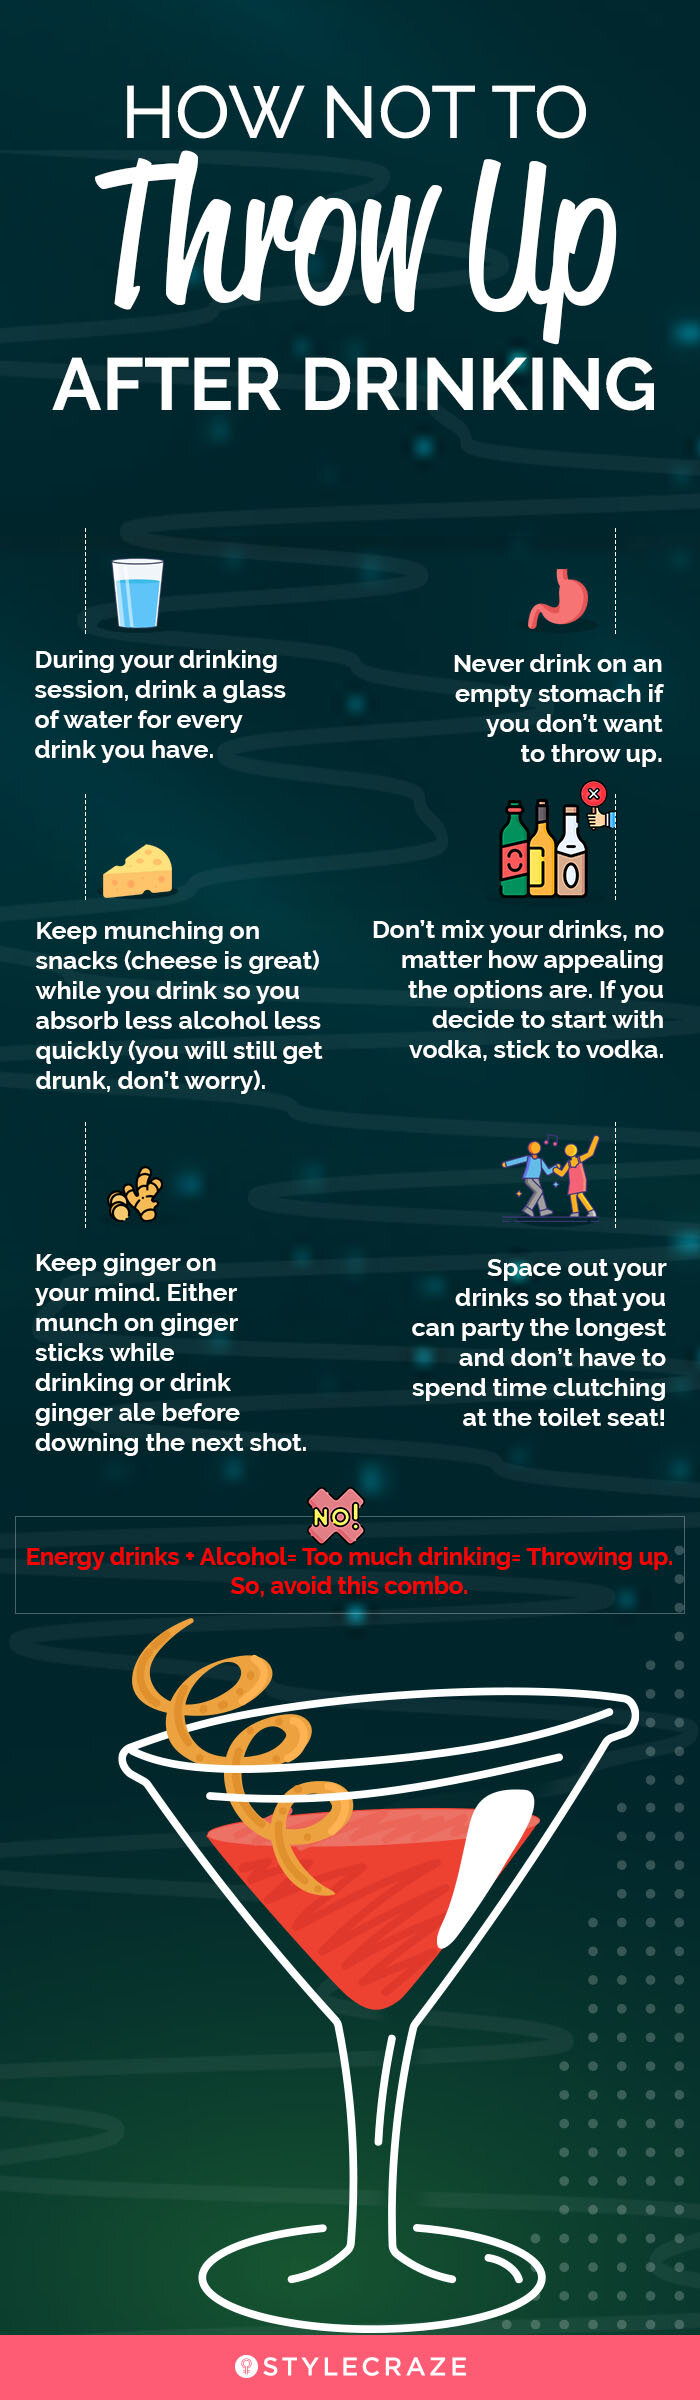 how not to throw up after drinking (infographic)